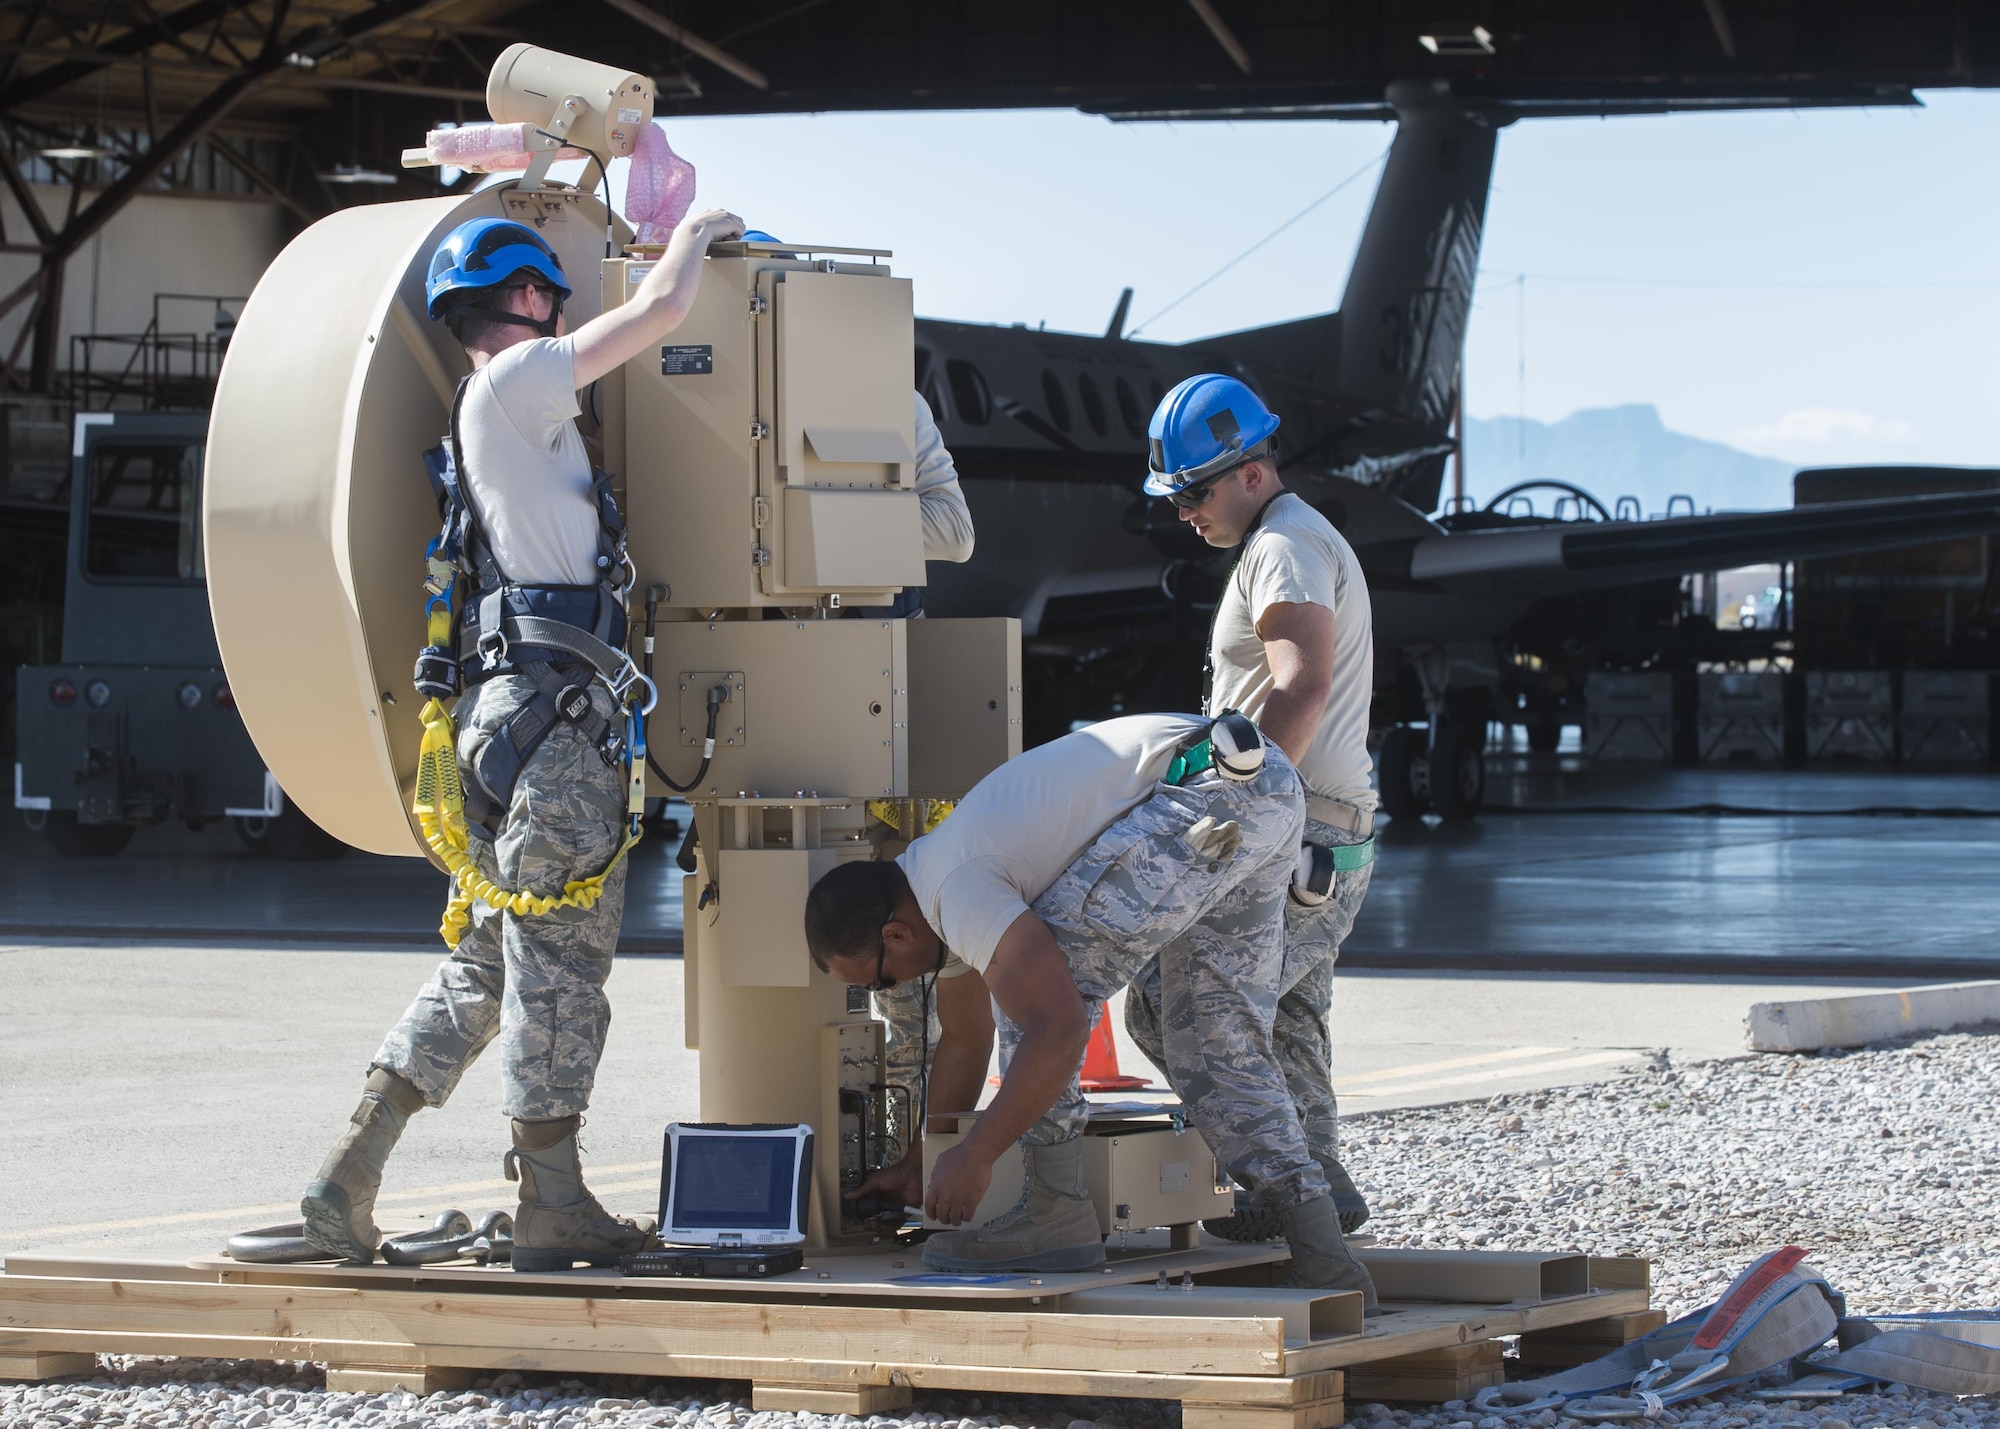 Aircraft communications maintenance Airmen from the 49th Aircraft Maintenance Squadron prepare a Ground Data Terminal antenna to be crane lifted at Holloman Air Force Base, N.M., on Nov. 8, 2016. The GDT is an 800-pound antenna that facilitates communication between Remotely Piloted Aircraft and their crews on the ground in the Ground Control Station. (U.S. Air Force photo by Senior Airman Emily Kenney) 